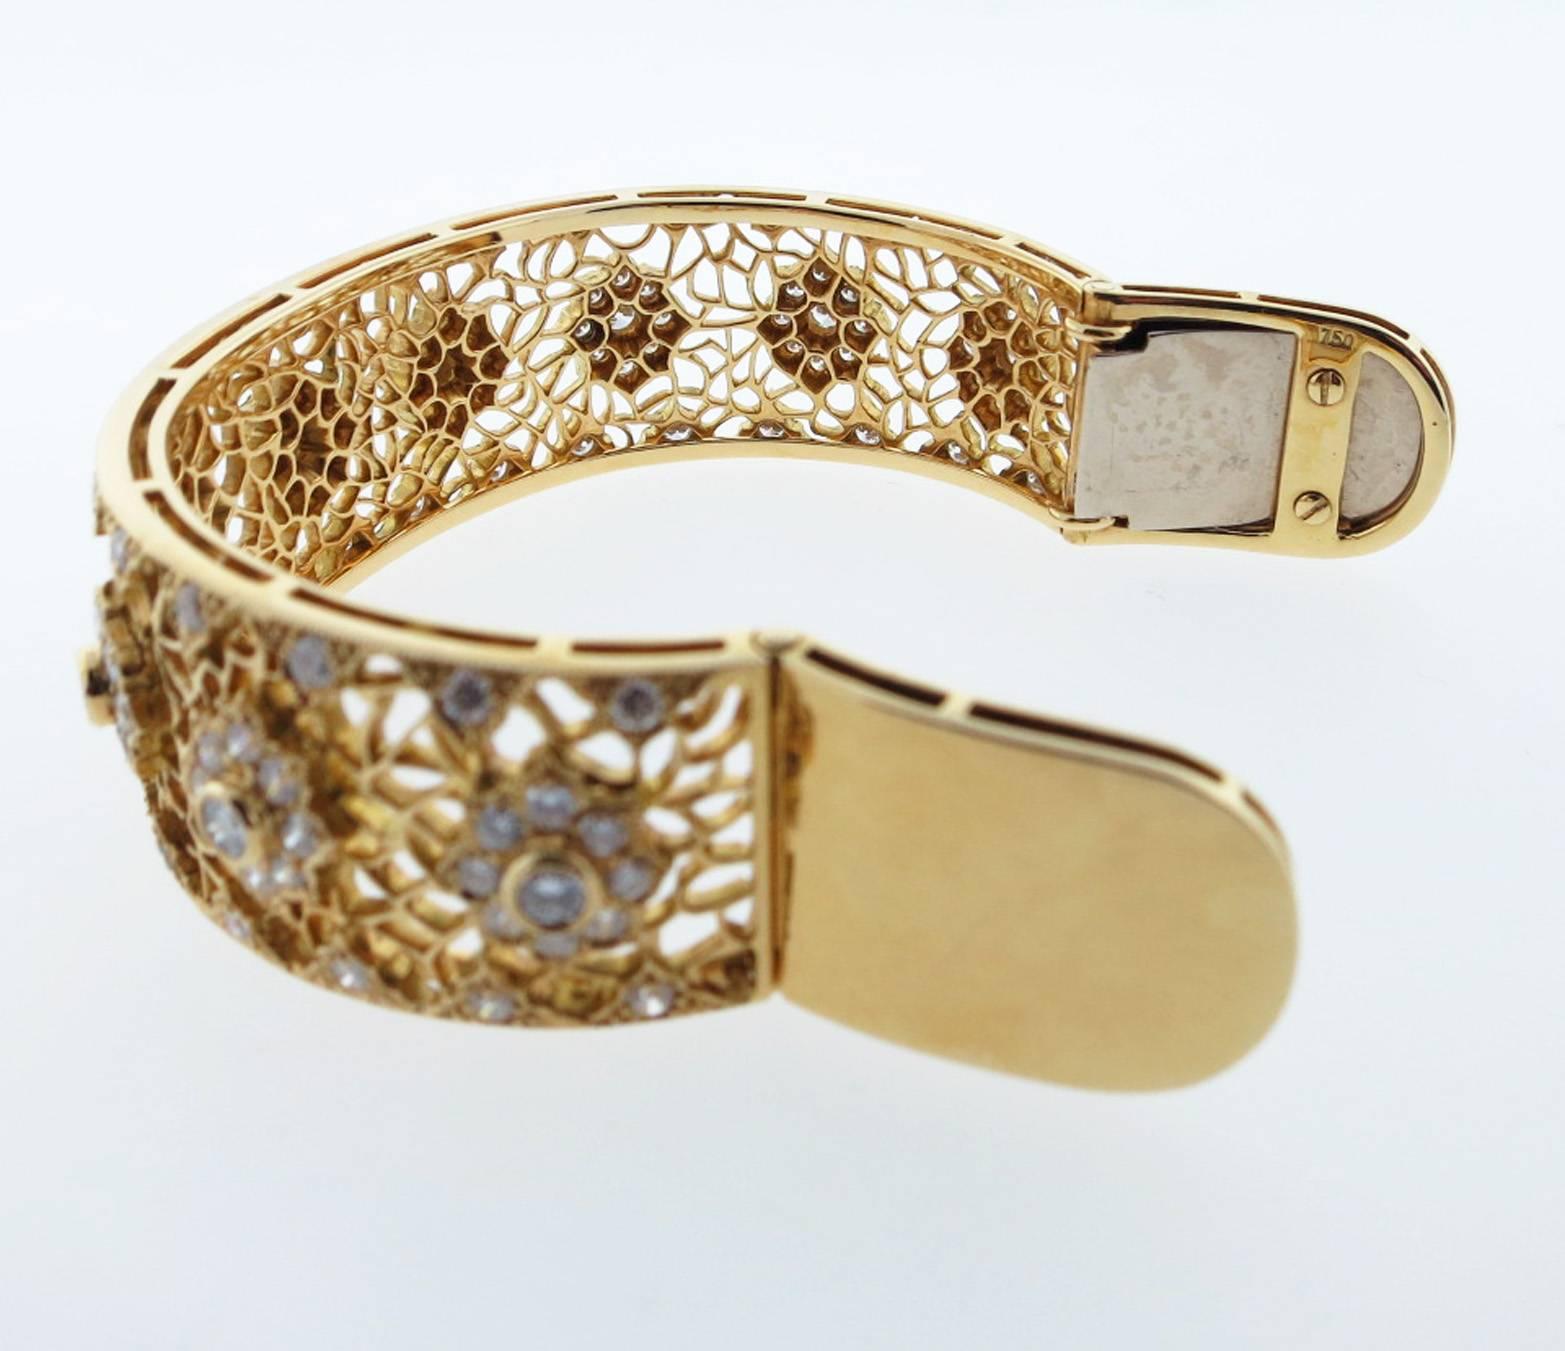 18kt. yellow gold open work floral motif  hinged cuff bracelet. The bracelet is bead and bezel set with 117 round brilliant cut diamonds totaling approx 4.0cts. grading Vs clarity G color. The bracelet will fit most wrists .